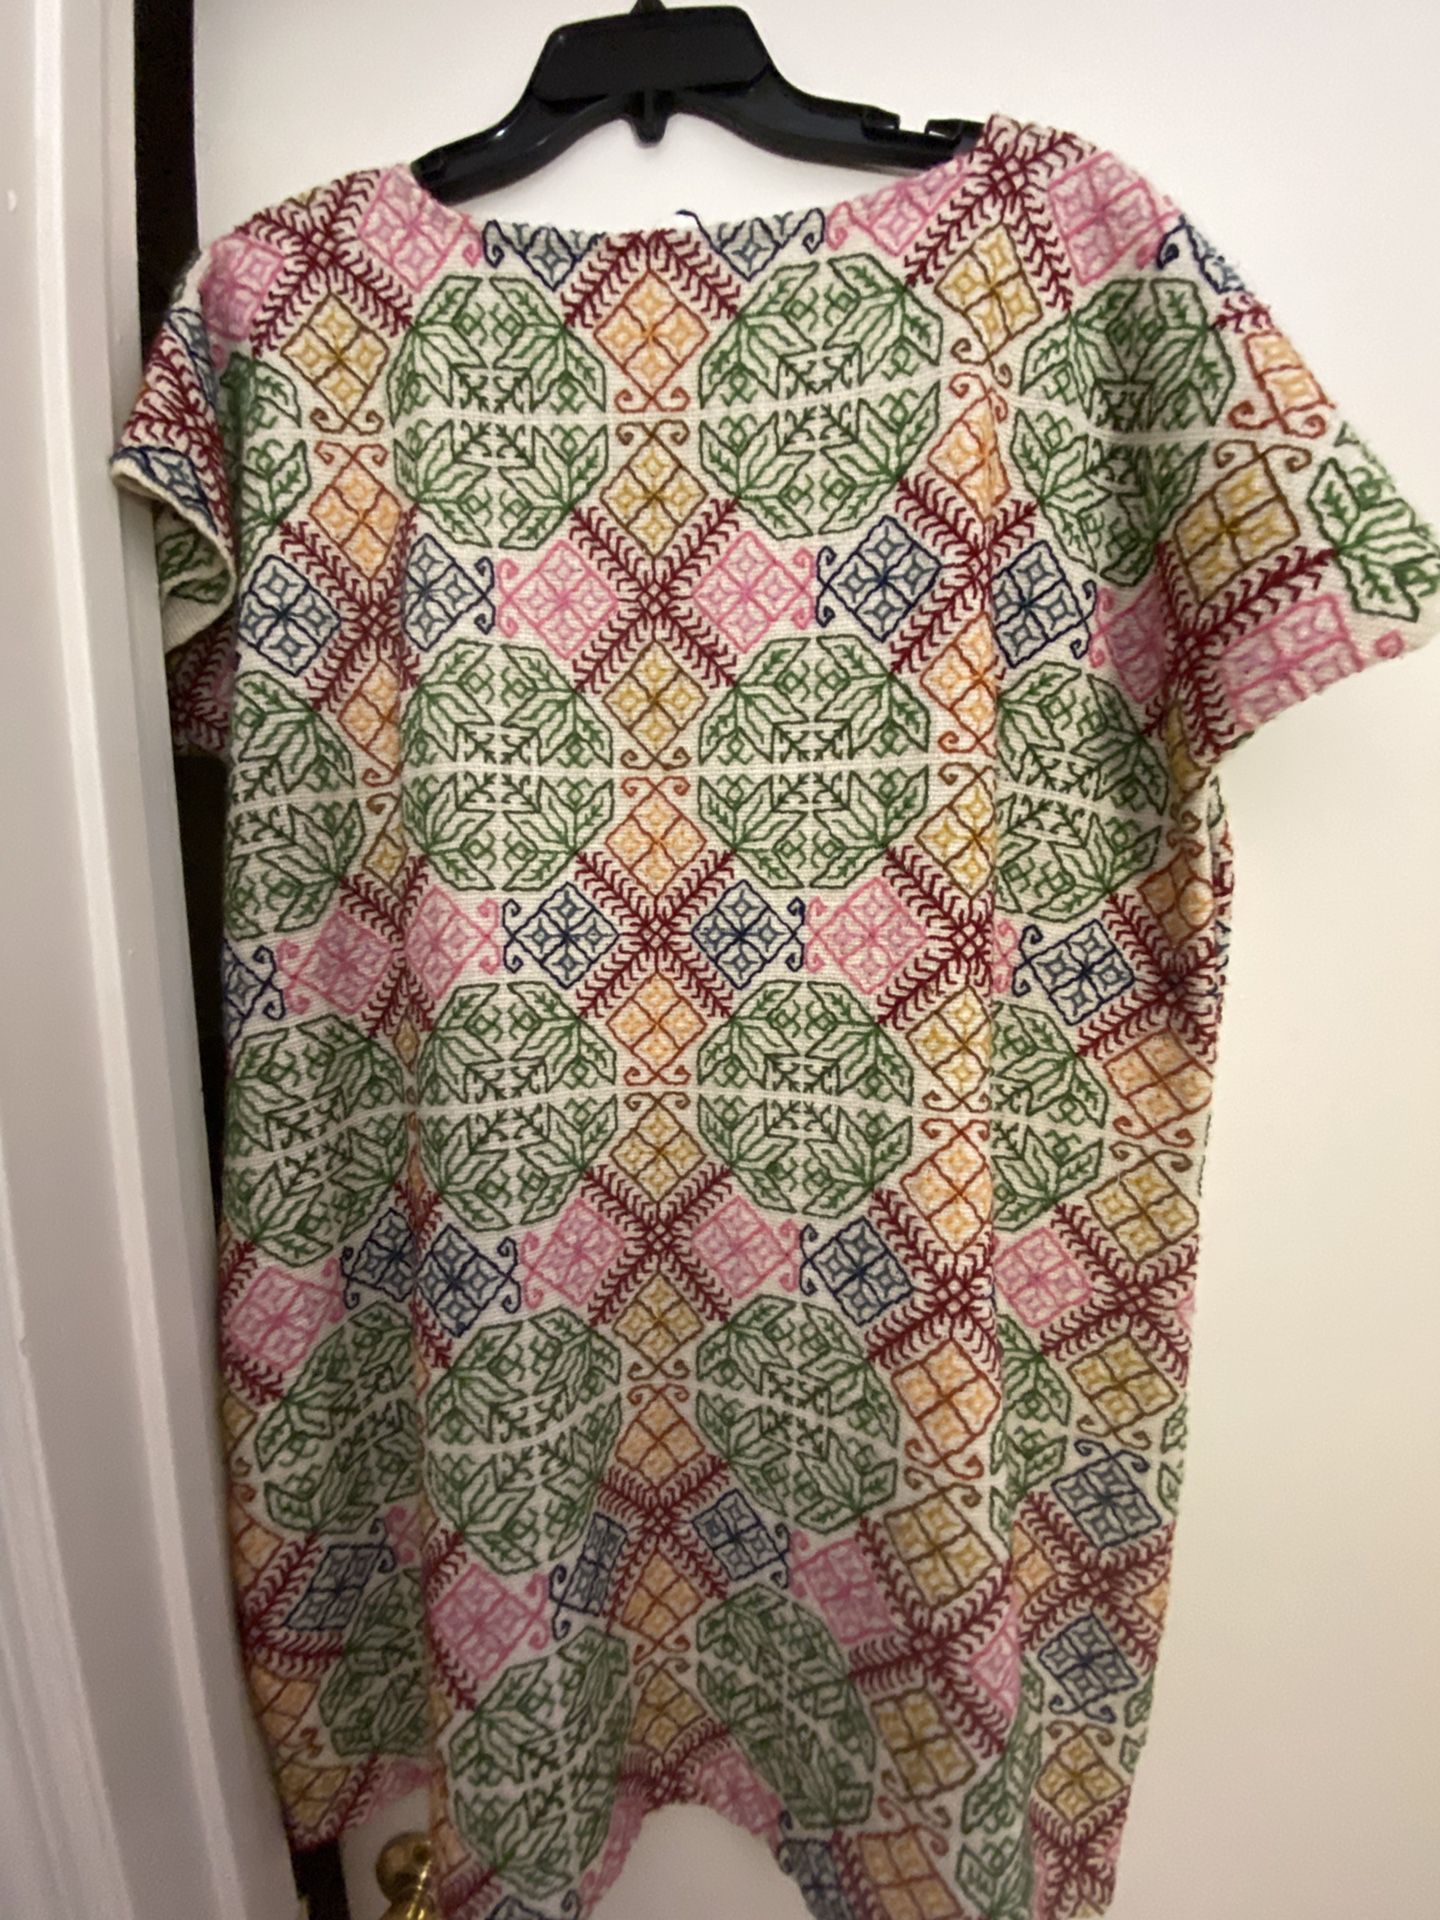 Unique Handmade Dress From Puebla Mexico! New, Never Worn.